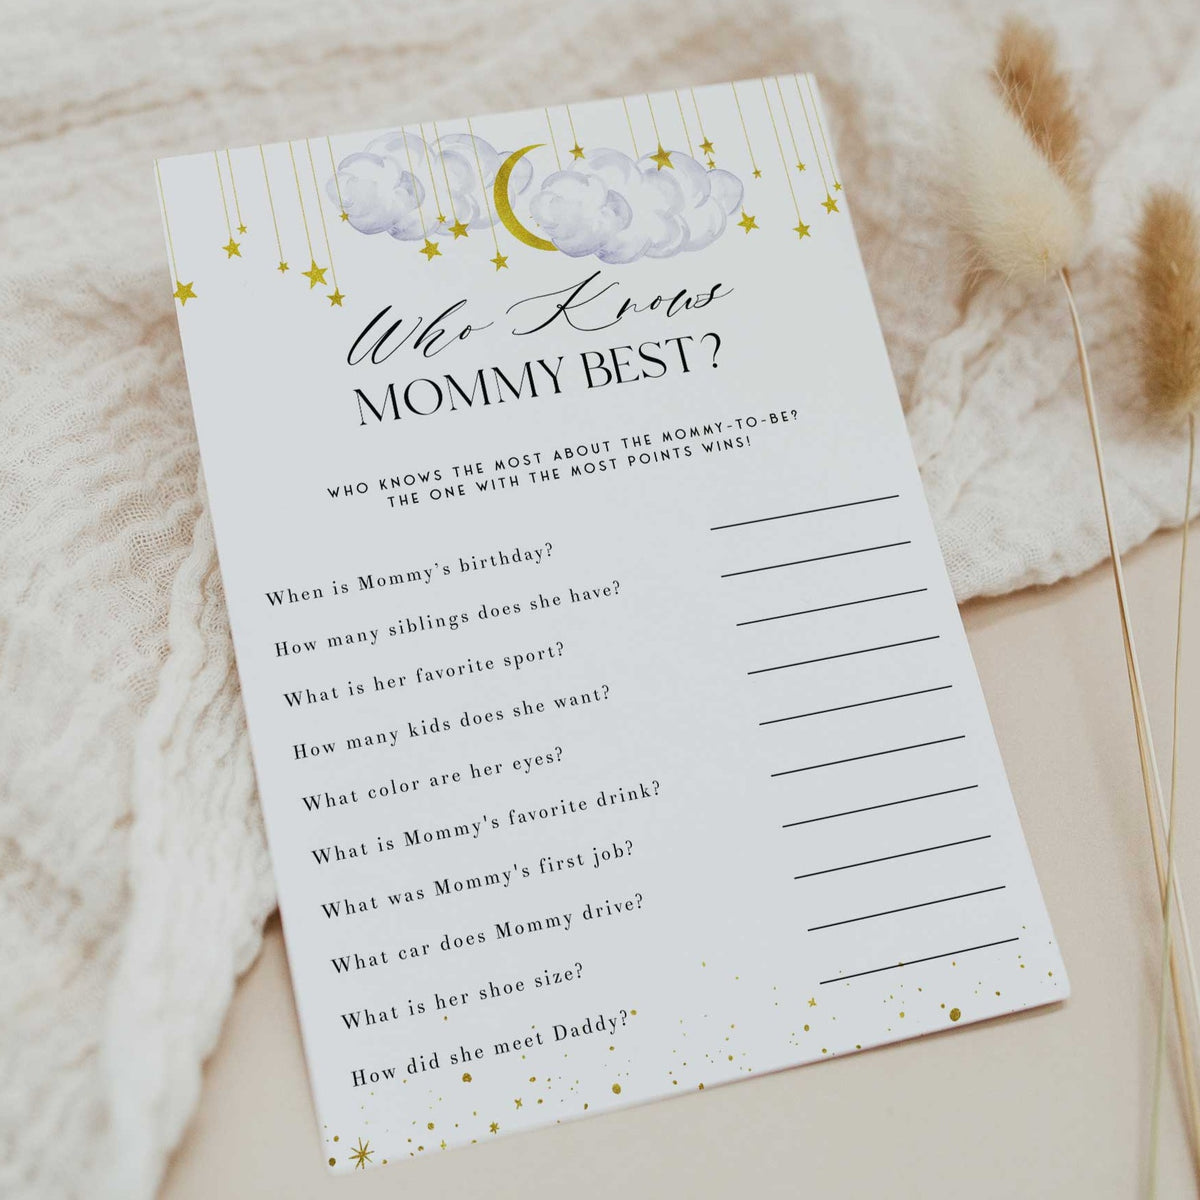 Fully editable and printable baby shower who knows mommy best game with a little star design. Perfect for a Twinkle Little Star baby shower themed party